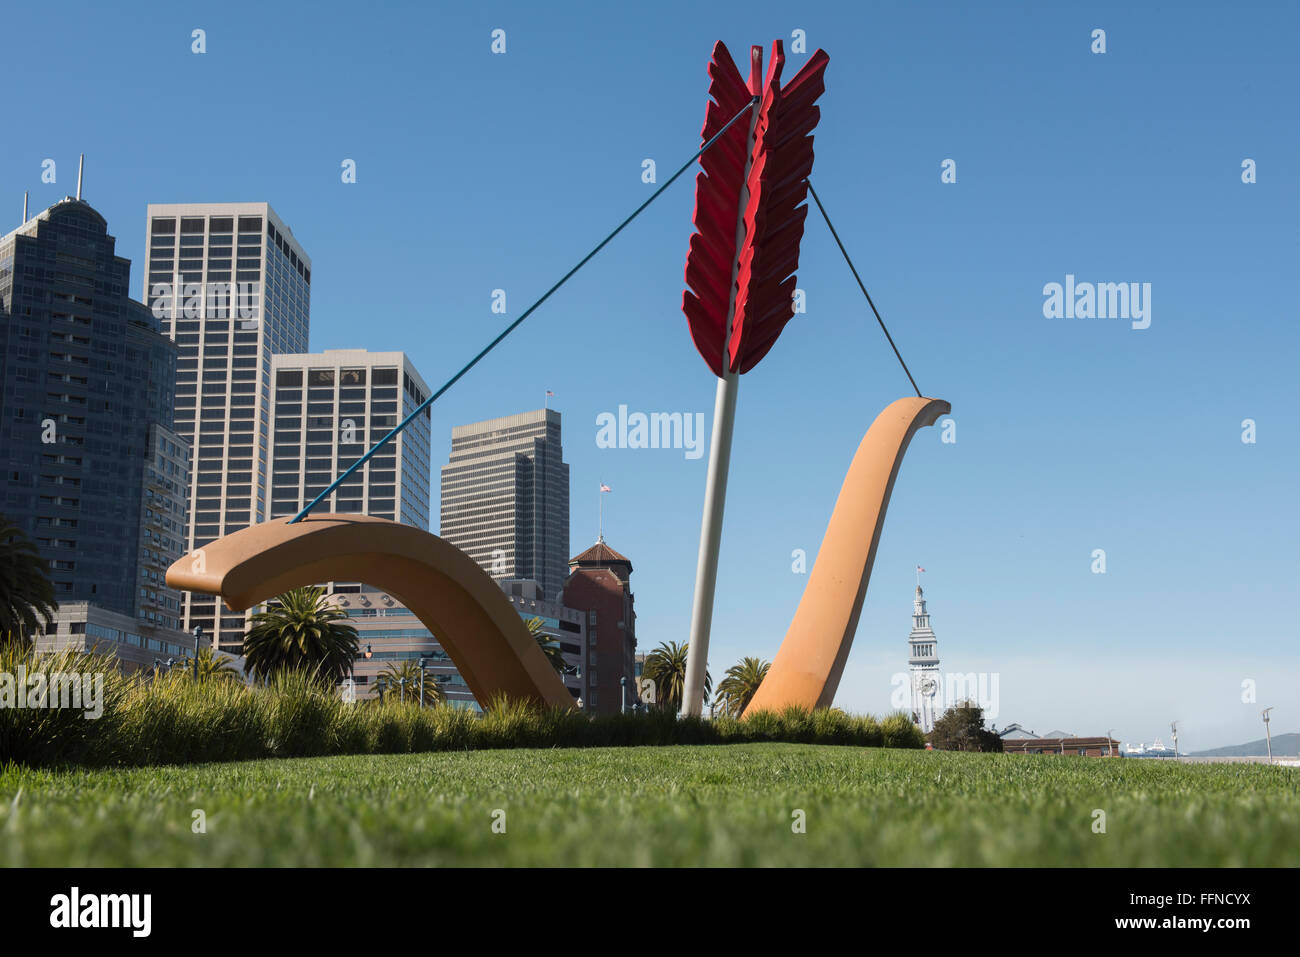 Public Sculpture 'Cupid's Span' near the waterfront in downtown San Francisco, California, USA Stock Photo